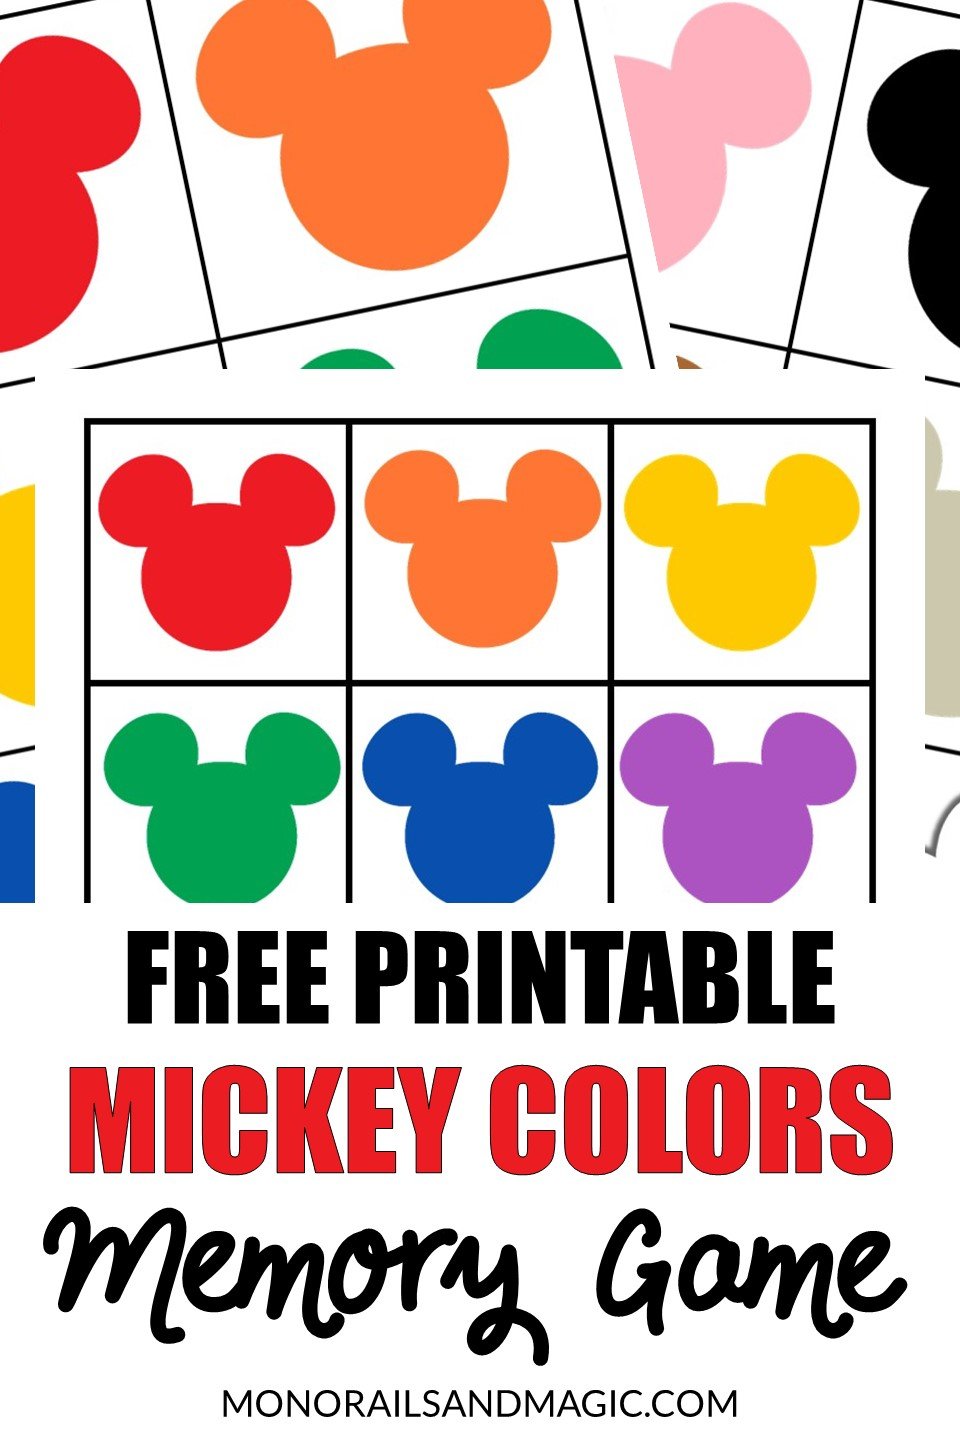 Free printable Mickey Mouse colors memory game for kids.